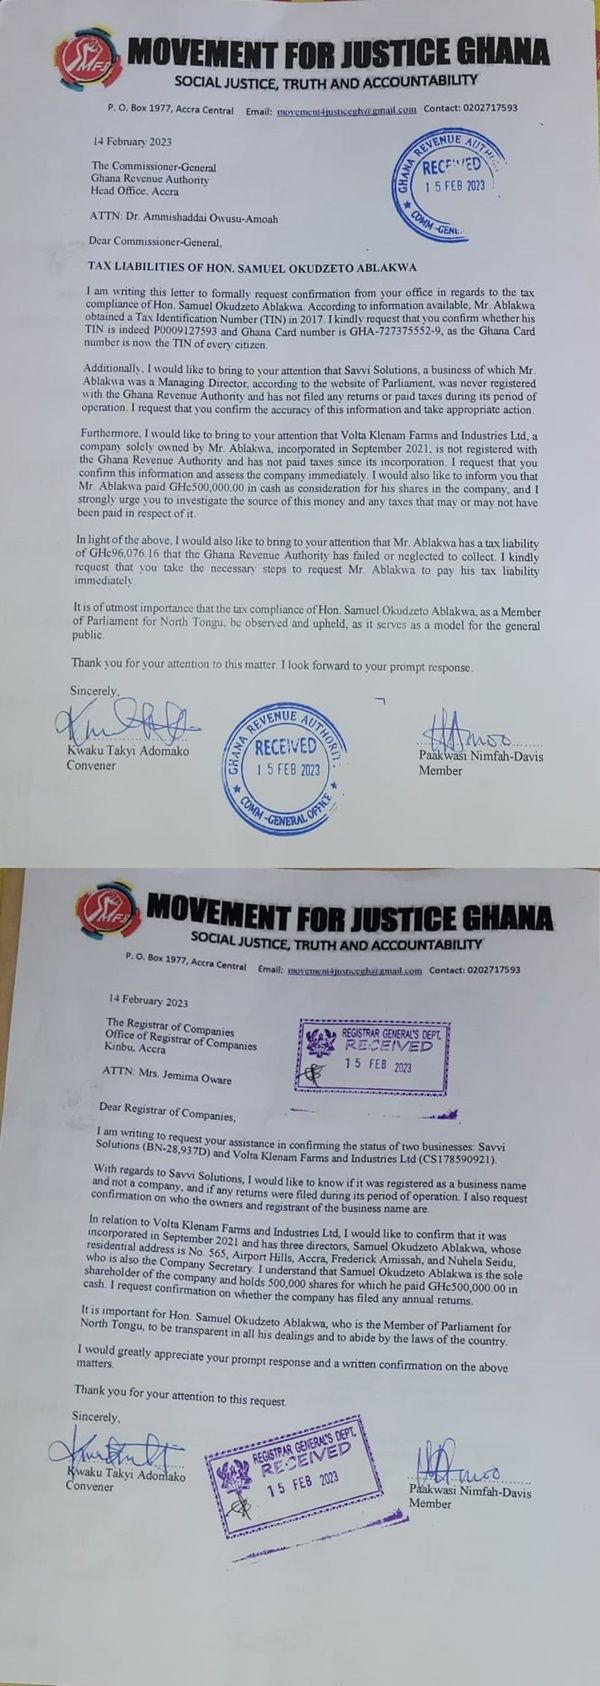 Letter by the Movement For Justice Ghana makes serious allegations against Ablakwa.